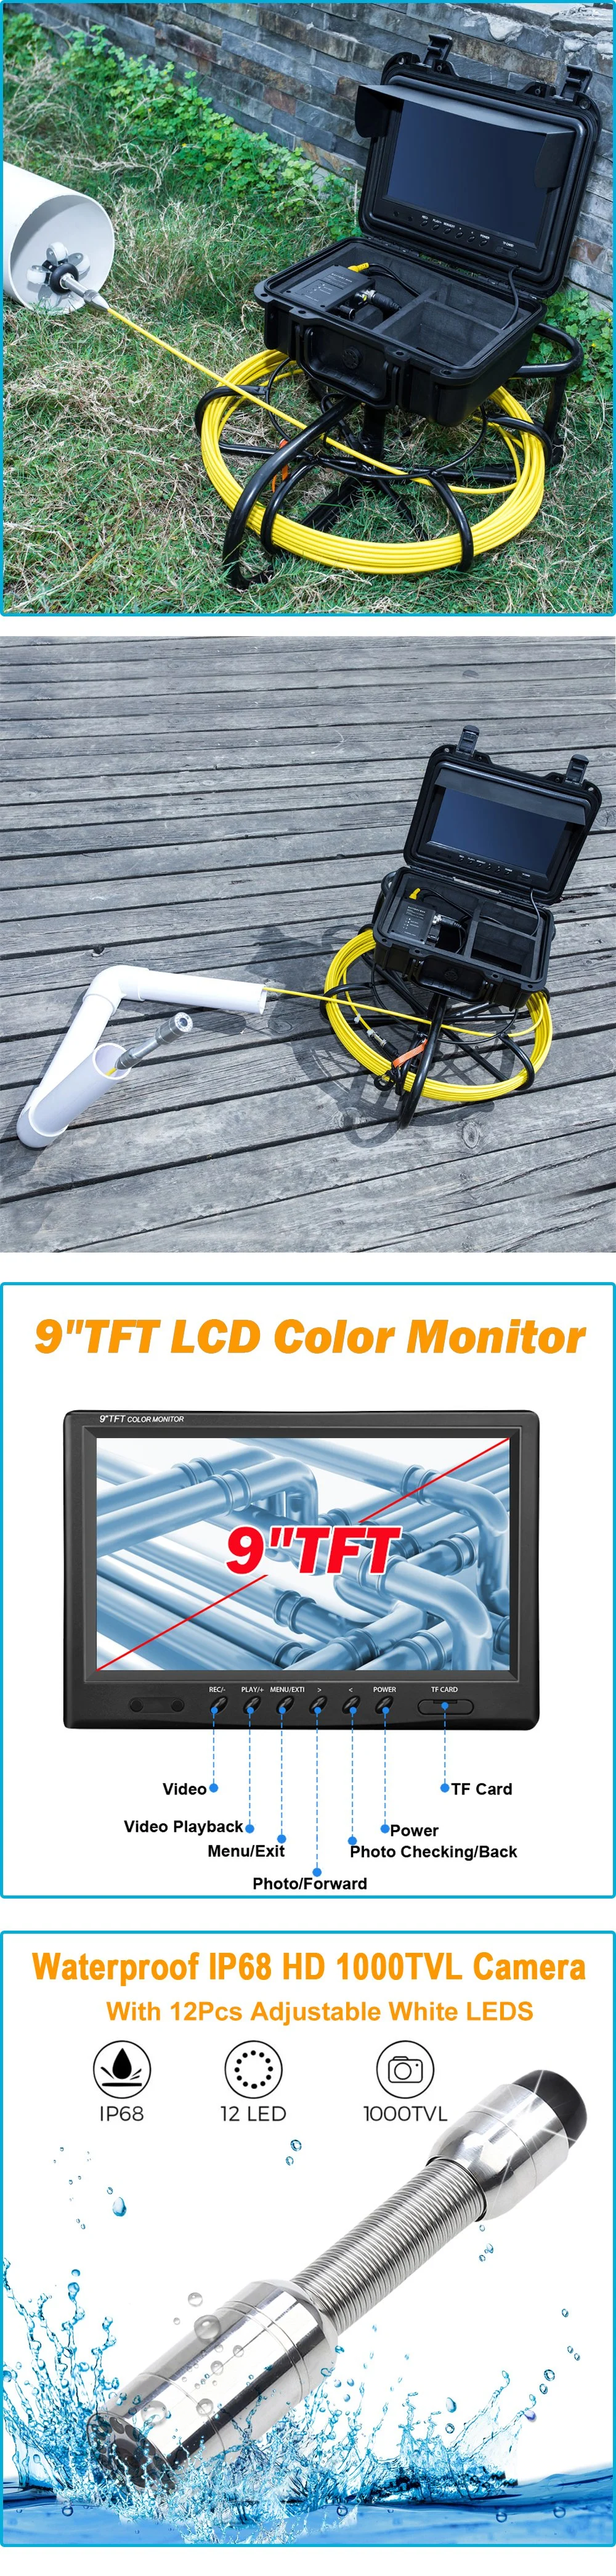 9inch TFT LCD Screen Pipeline Drain Sewer Inspection Video Camera 20m Cable Industrial Endoscope